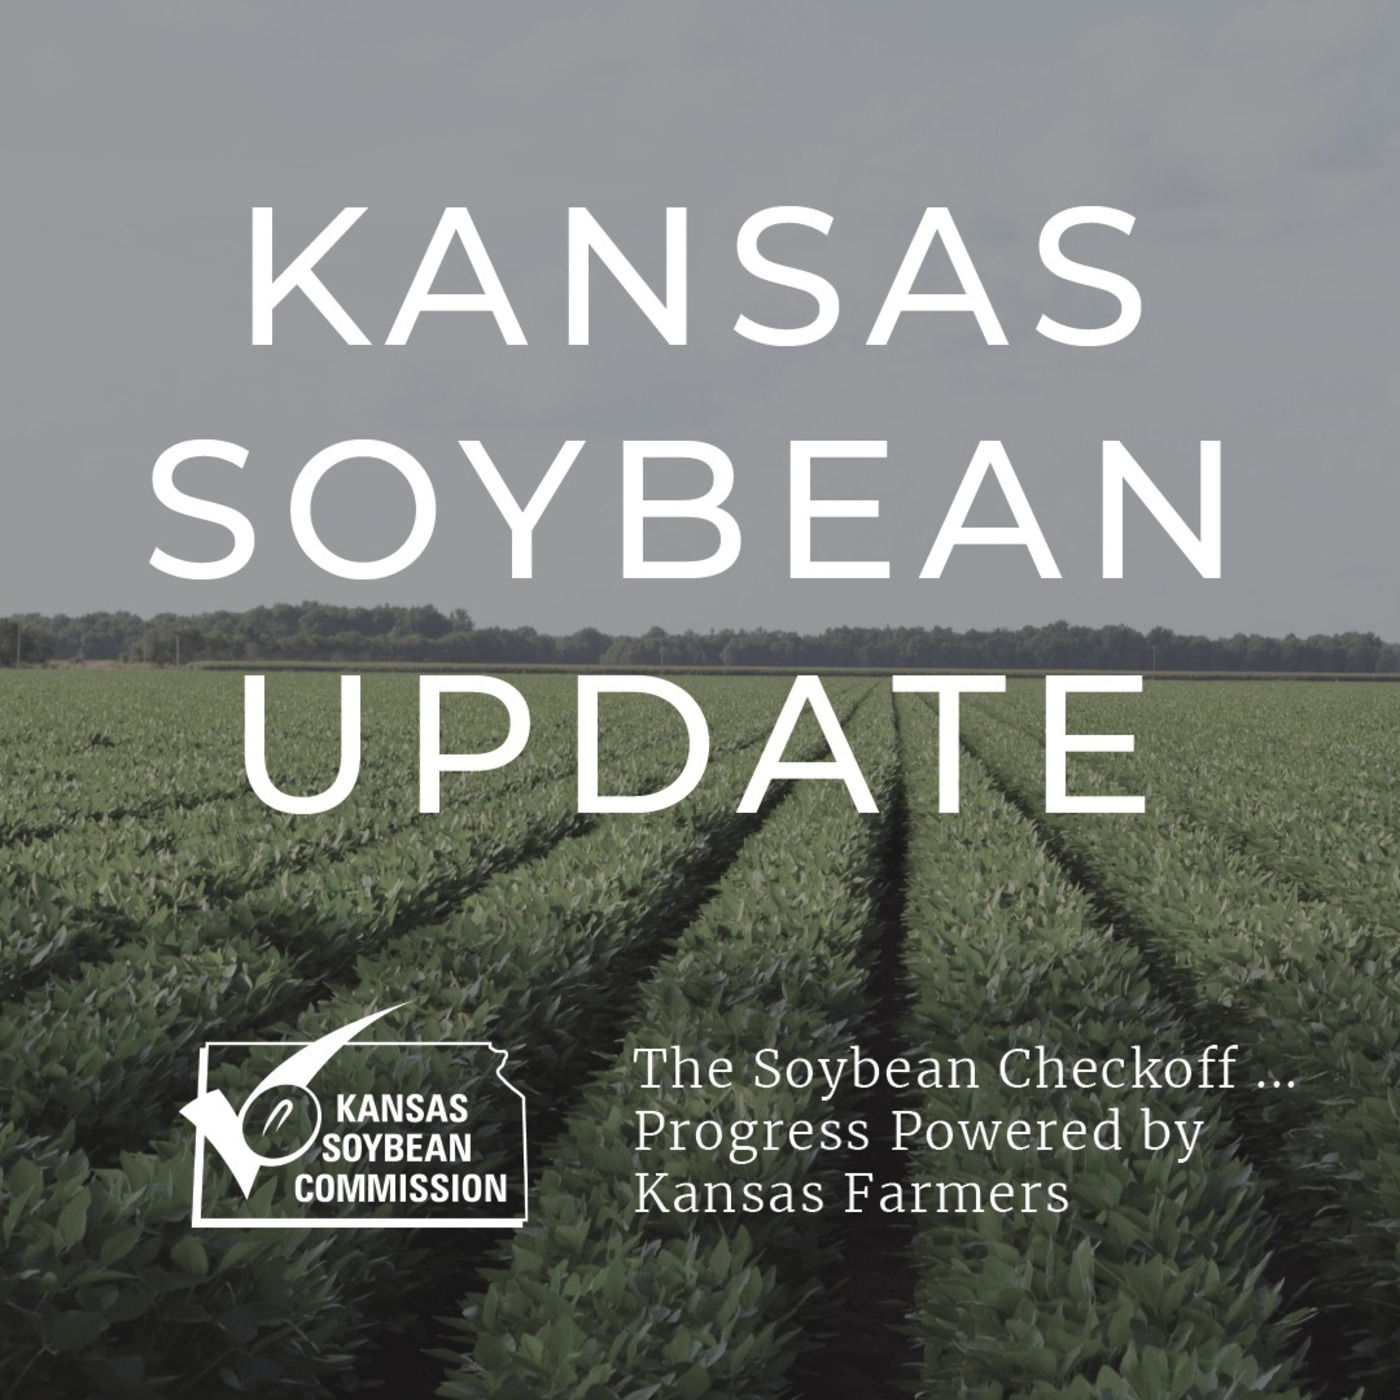 Soybean Research Information Network